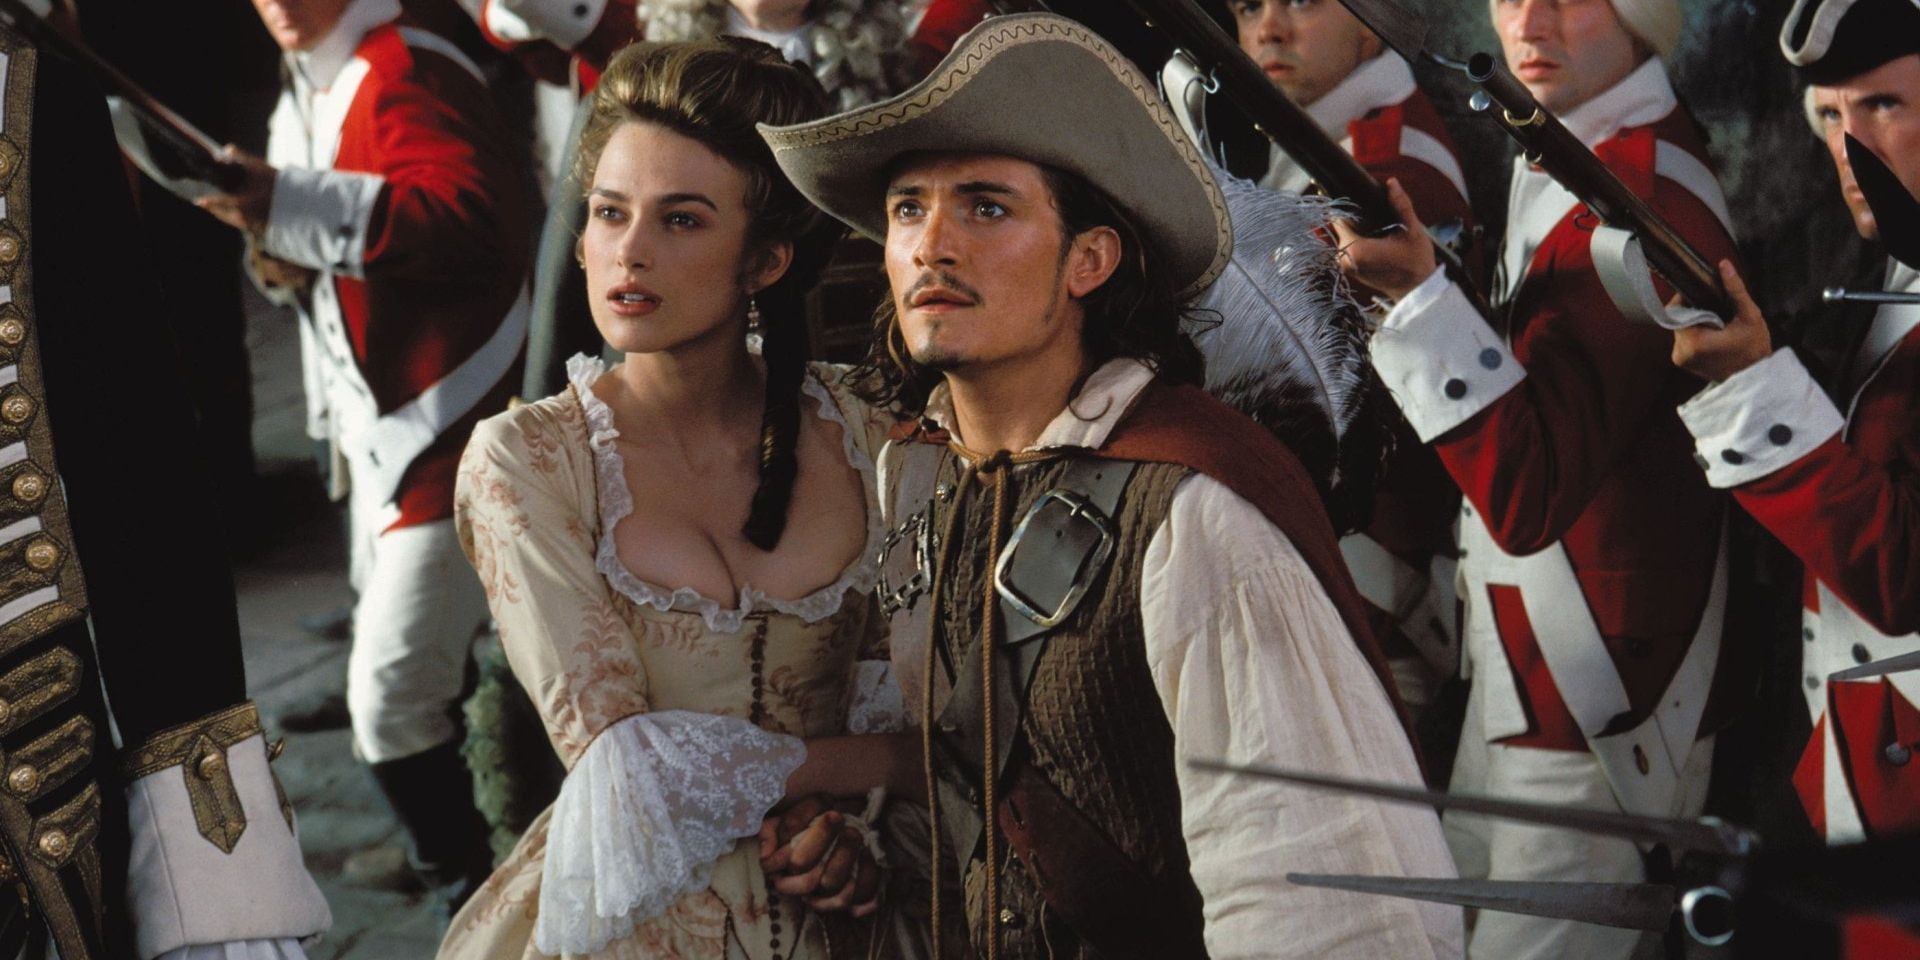 Will and Elizabeth together at the end of The Curse of the Black Pearl